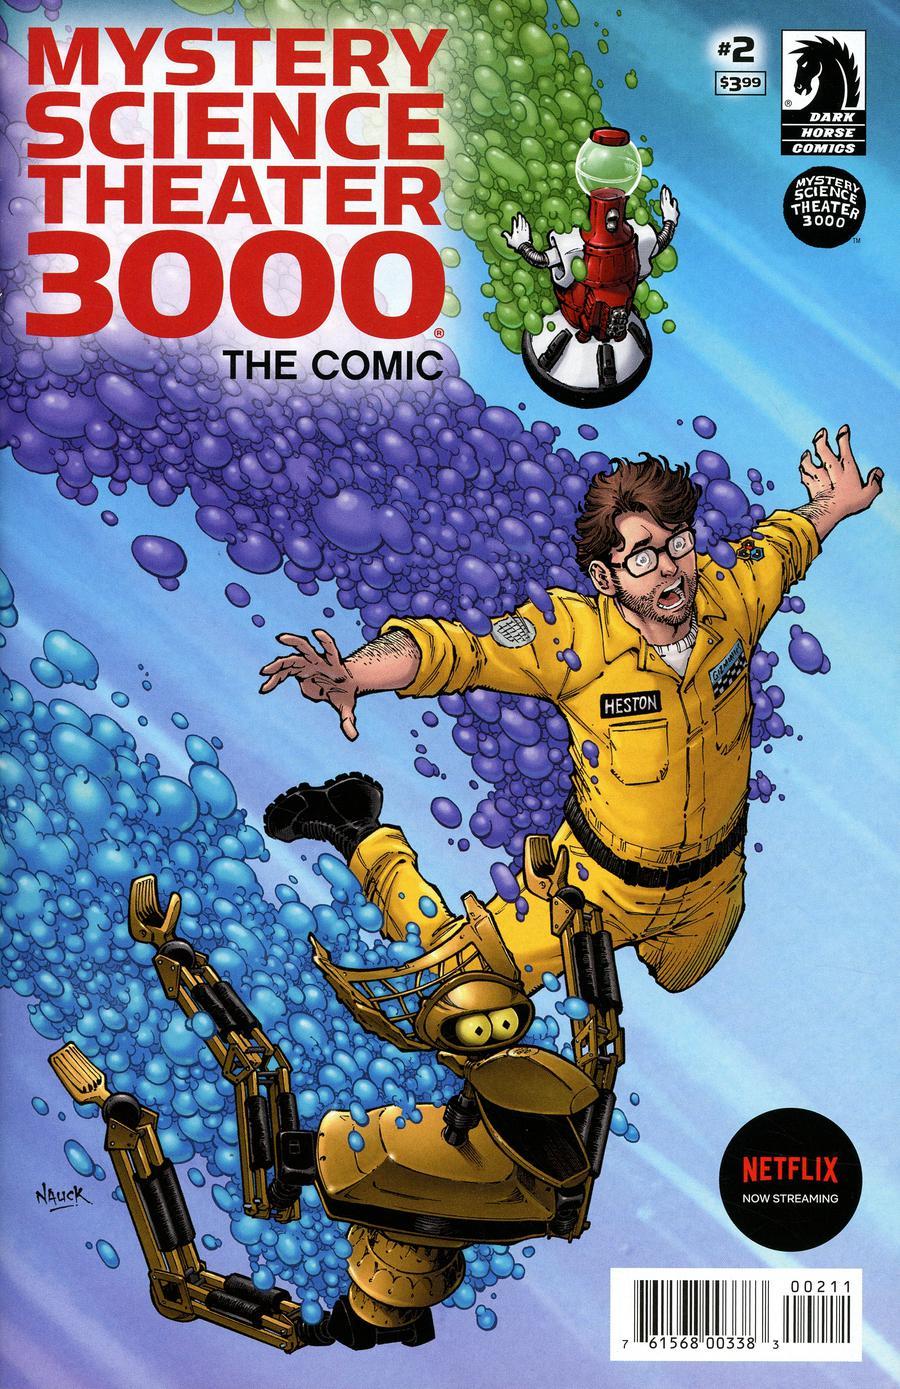 Mystery Science Theater 3000 Vol. 1 #2